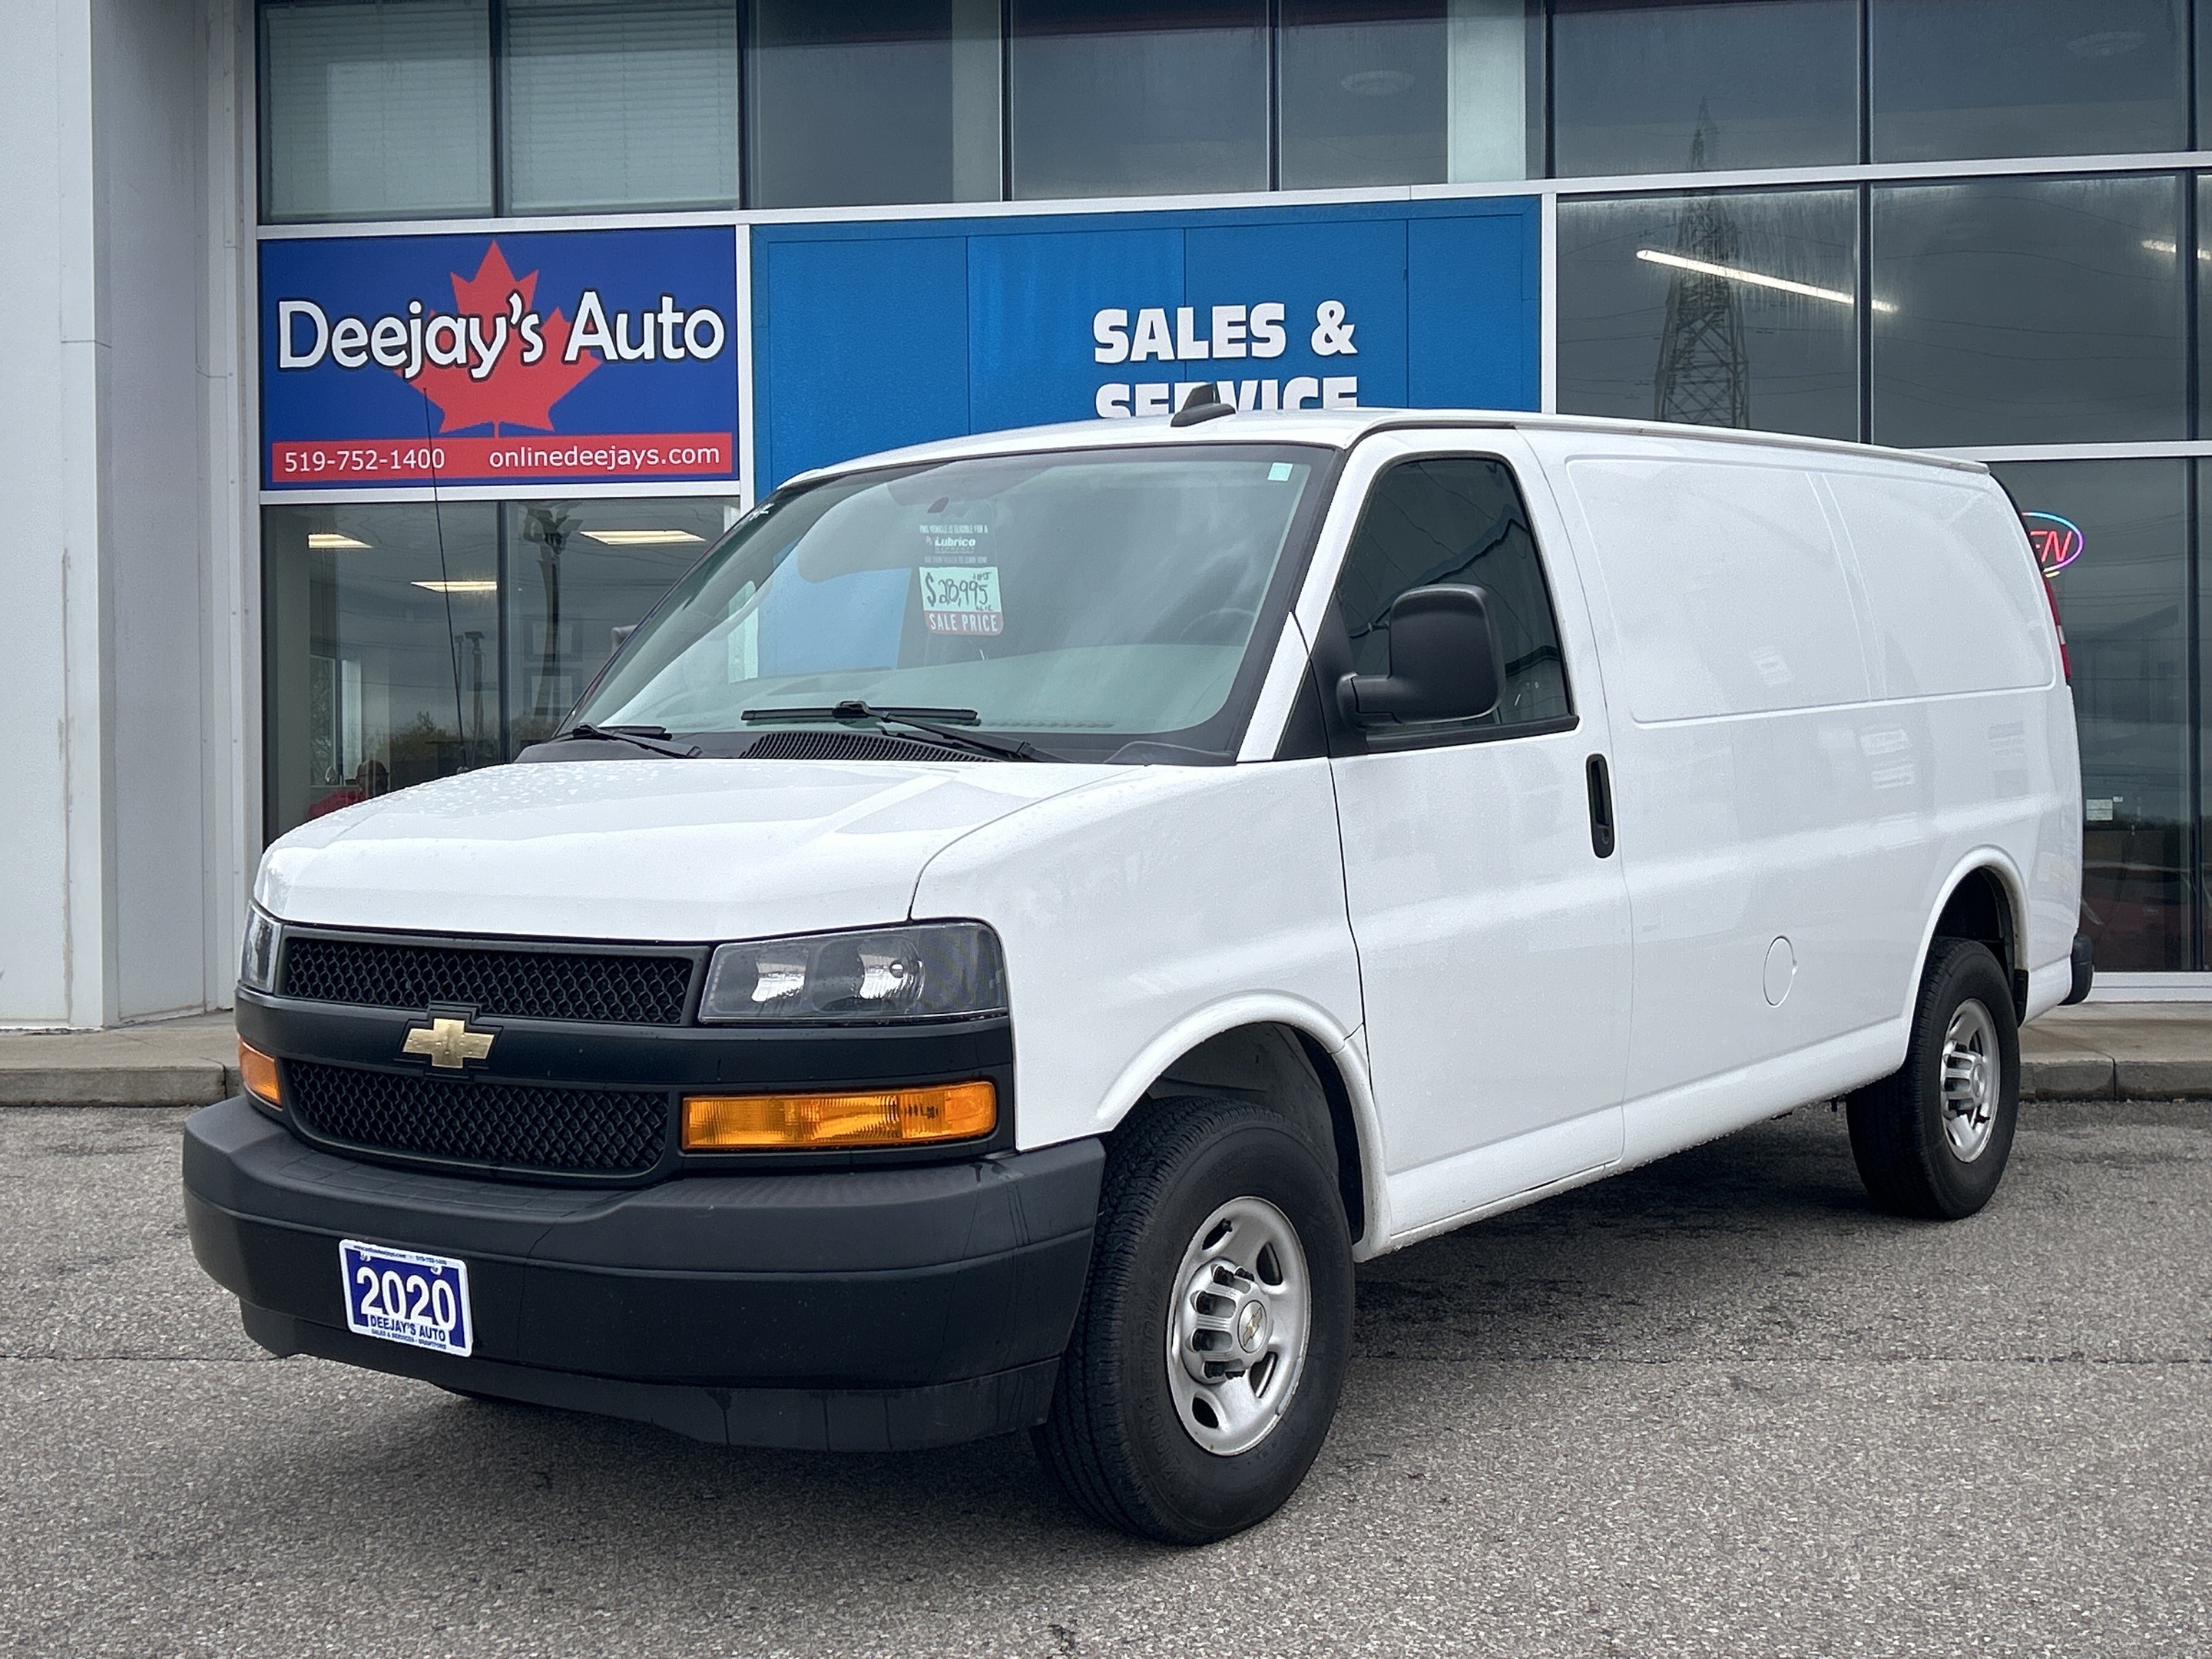 2020 Chevrolet Express RWD 2500 135 | Back-Up Camera | Clean Carfax